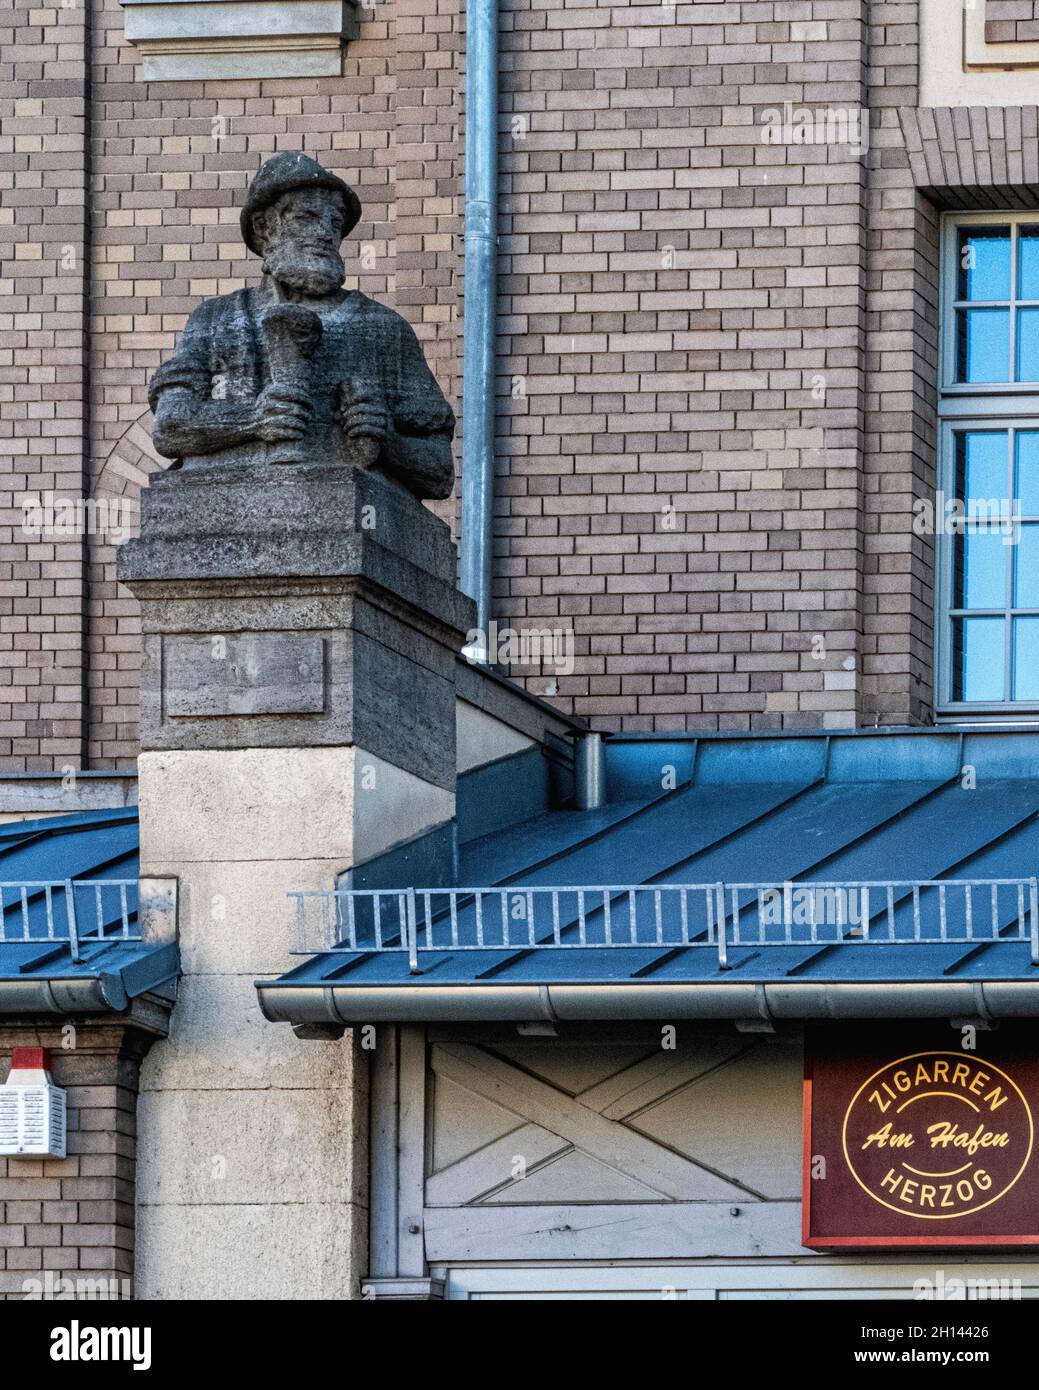 Zigarren Herzog am Hafen, Herzog cigars in former old East Harbour canteen building that has listed monument protection. Stralauer Allee 9,Berlin Stock Photo